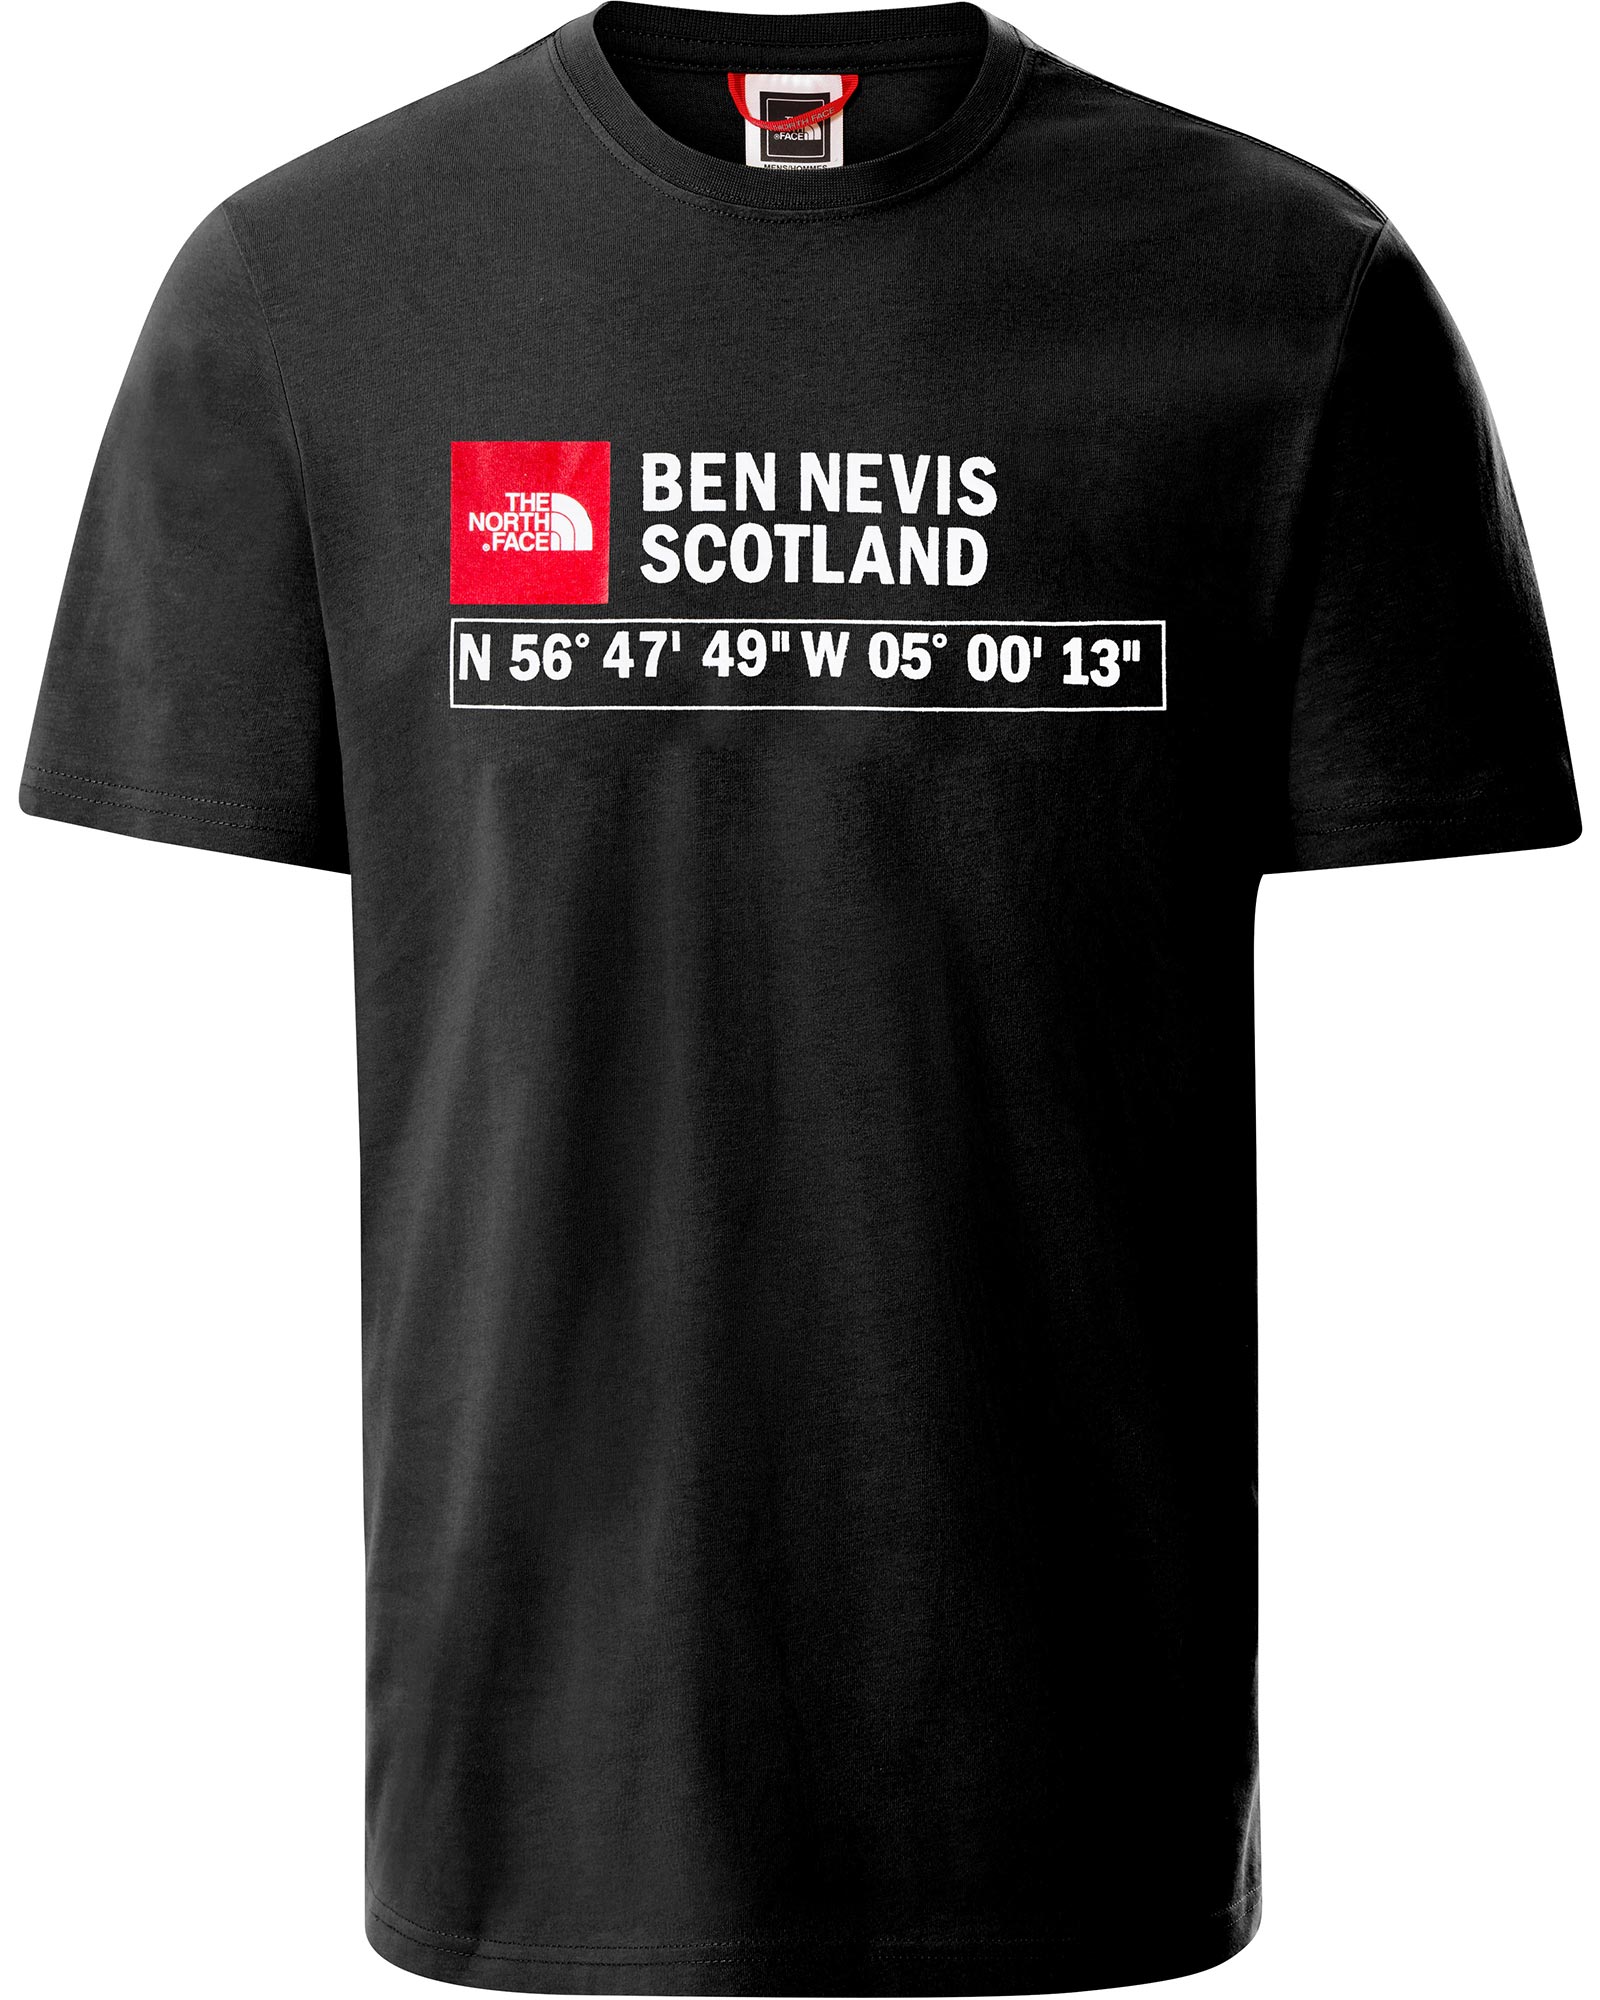 Product image of The North Face GPS Logo Men's T-Shirt Ben Nevis